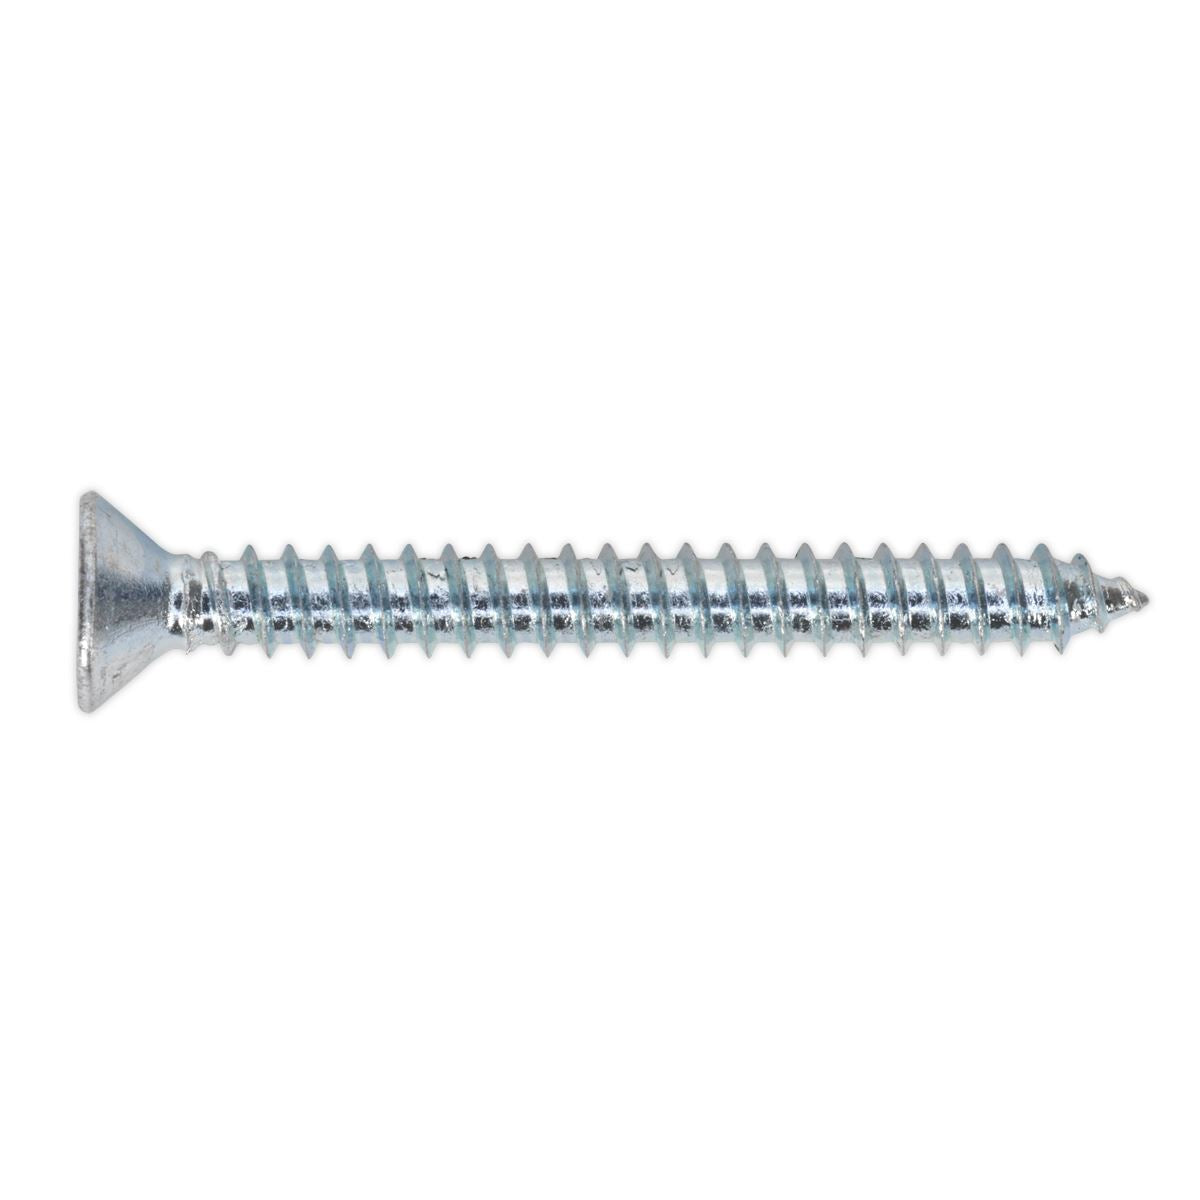 Sealey Self Tapping Screw 4.2 x 38mm Countersunk Pozi Pack of 100